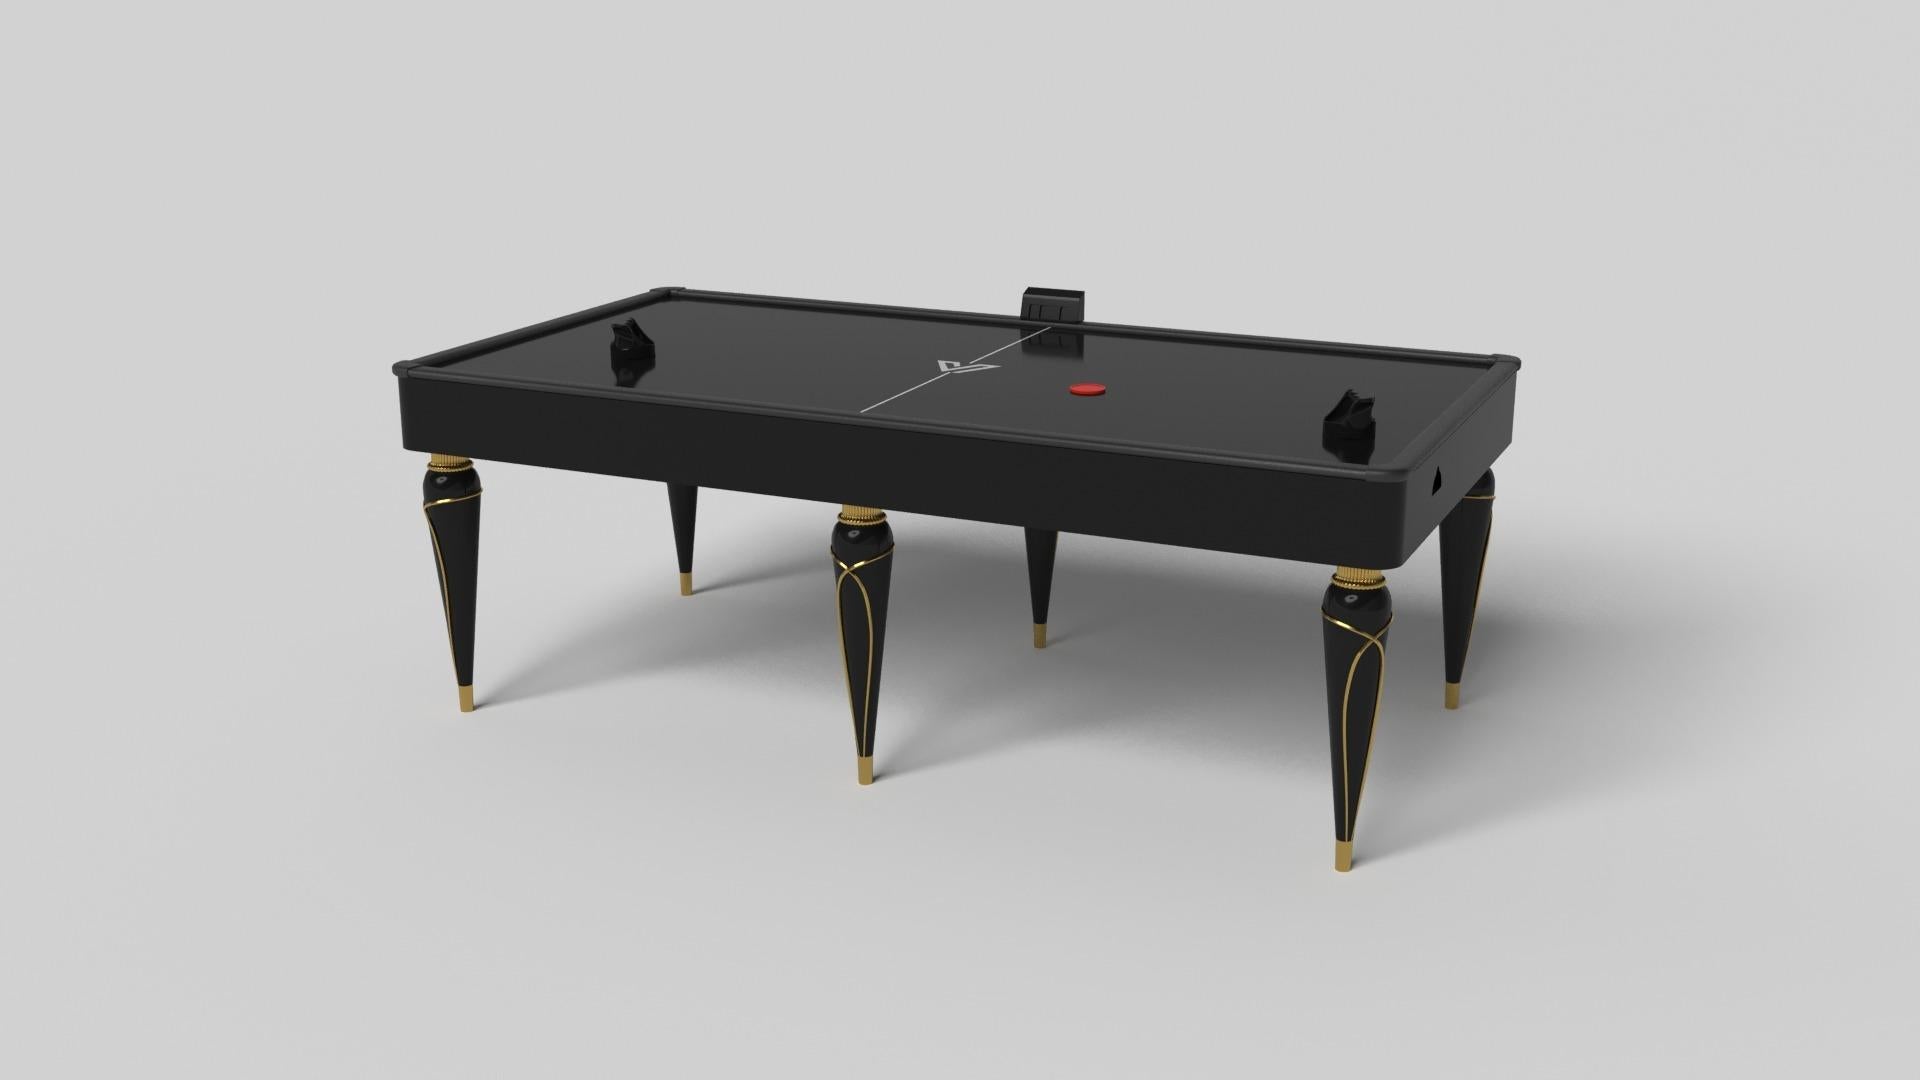 Champagne gold accents add undeniable elegance to this luxury air hockey table. Offering superior playability and uncompromised style, this design features hand carved details, decorative metal elements, and metal sabots at the bottom of each leg.